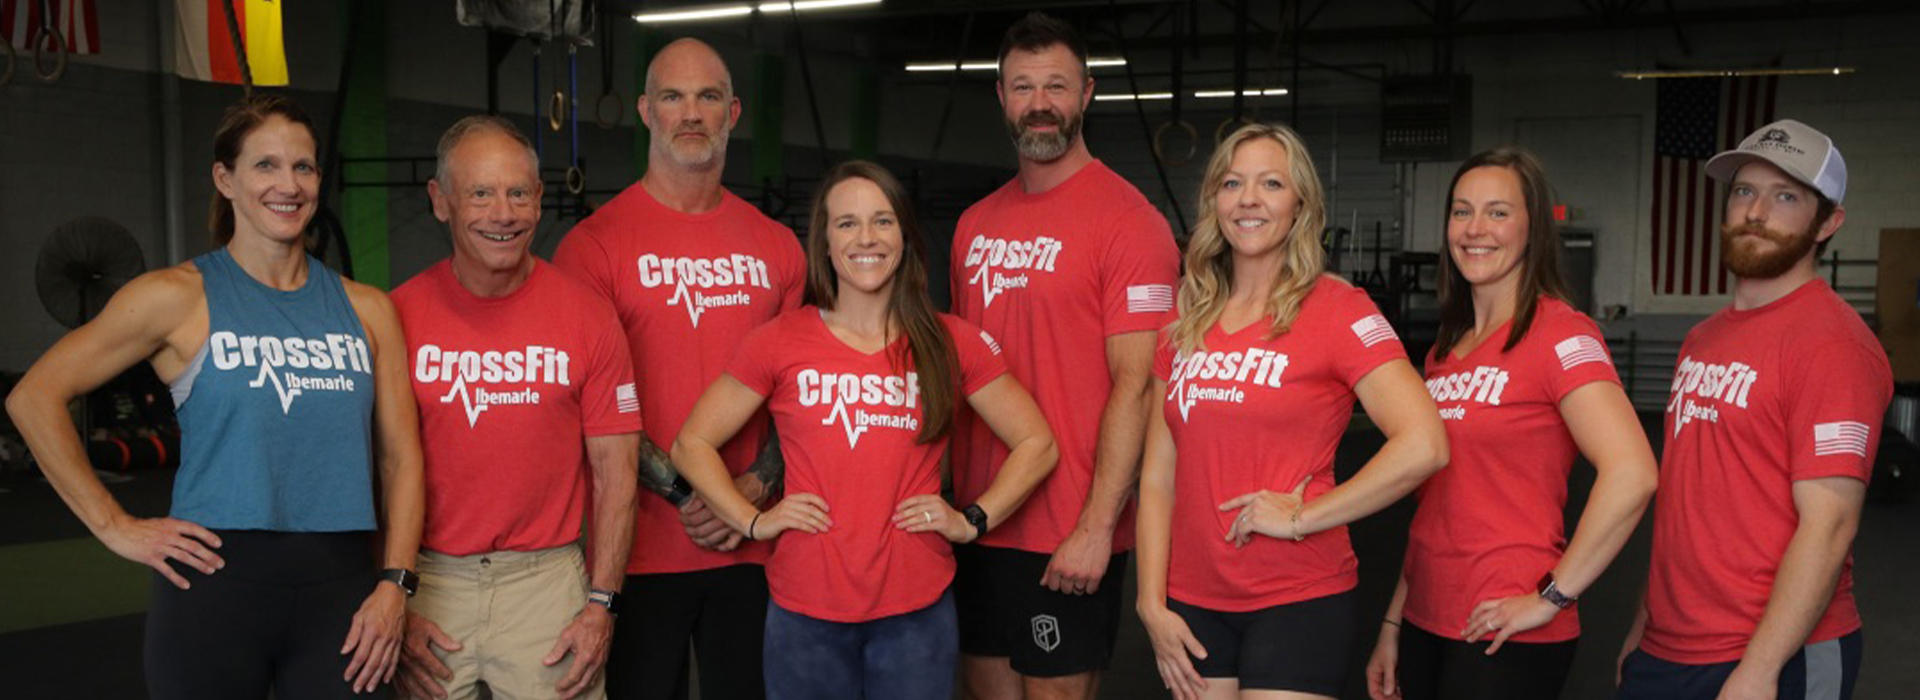 Top 5 Best CrossFit Gyms To Join Near Albemarle